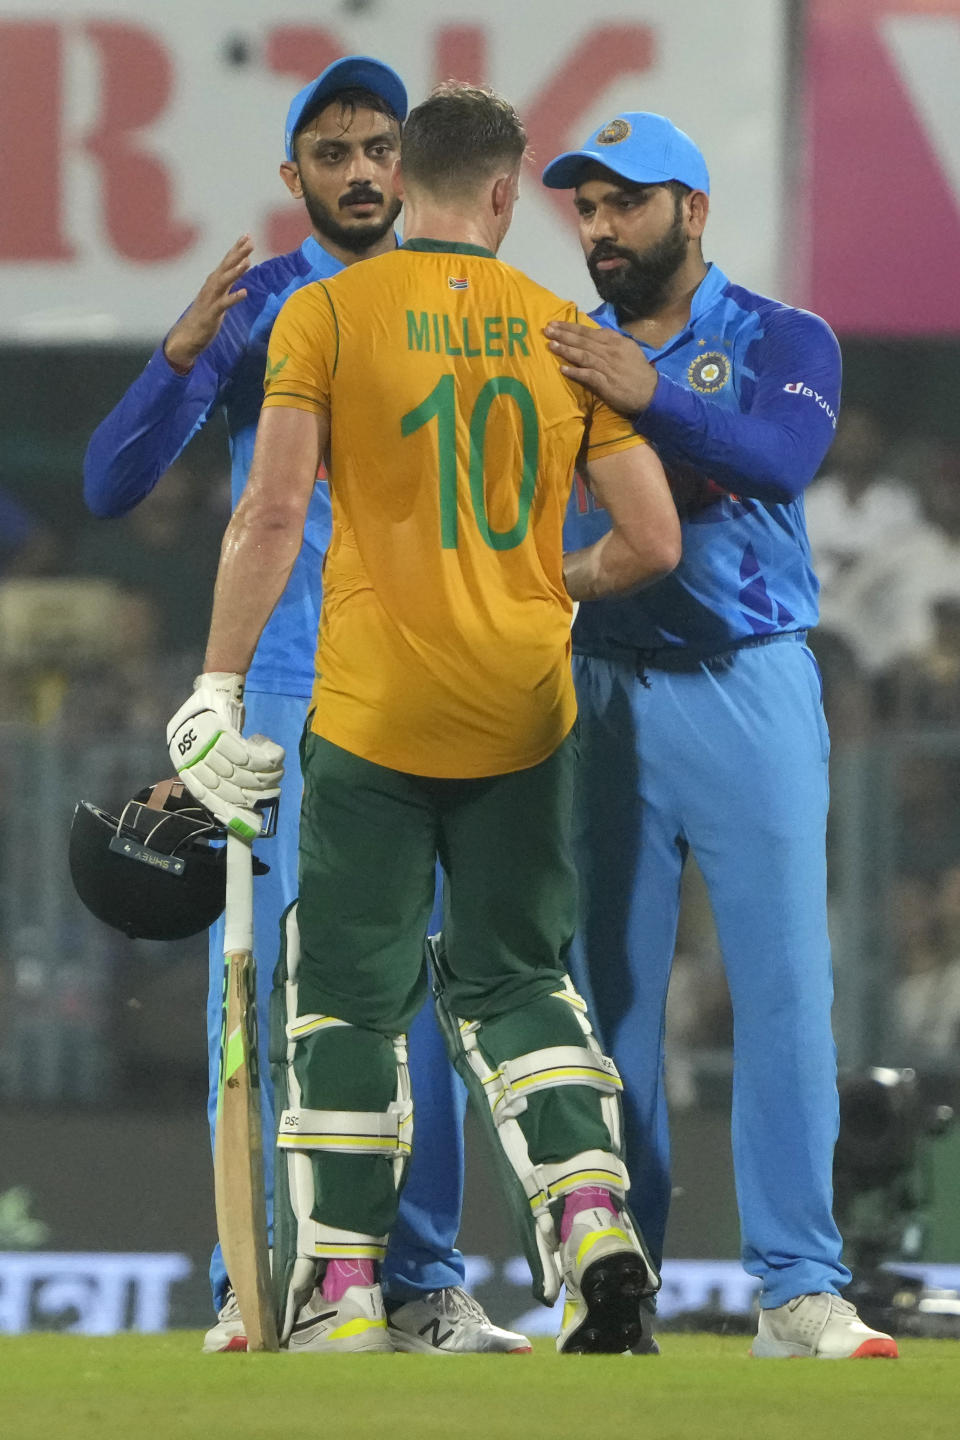 India's captain Rohit Sharma, right, congratulates South Africa's David Miller, center, on scoring a century during the second T20 cricket match between India and South Africa, in Guwahati, India, Sunday, Oct. 2, 2022. (AP Photo/Anupam Nath)